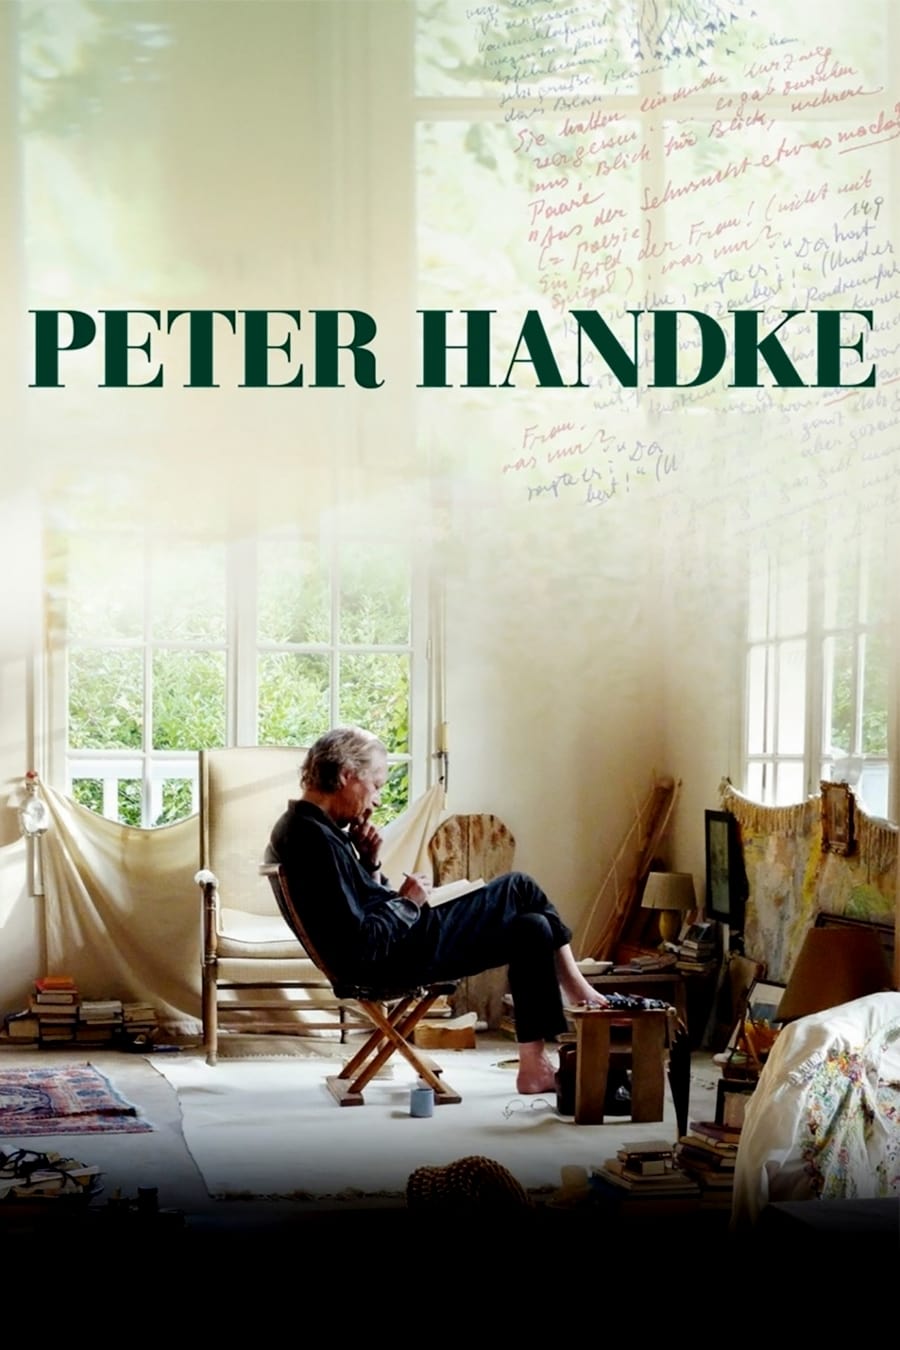 Peter Handke: In the Woods, Might Be Late